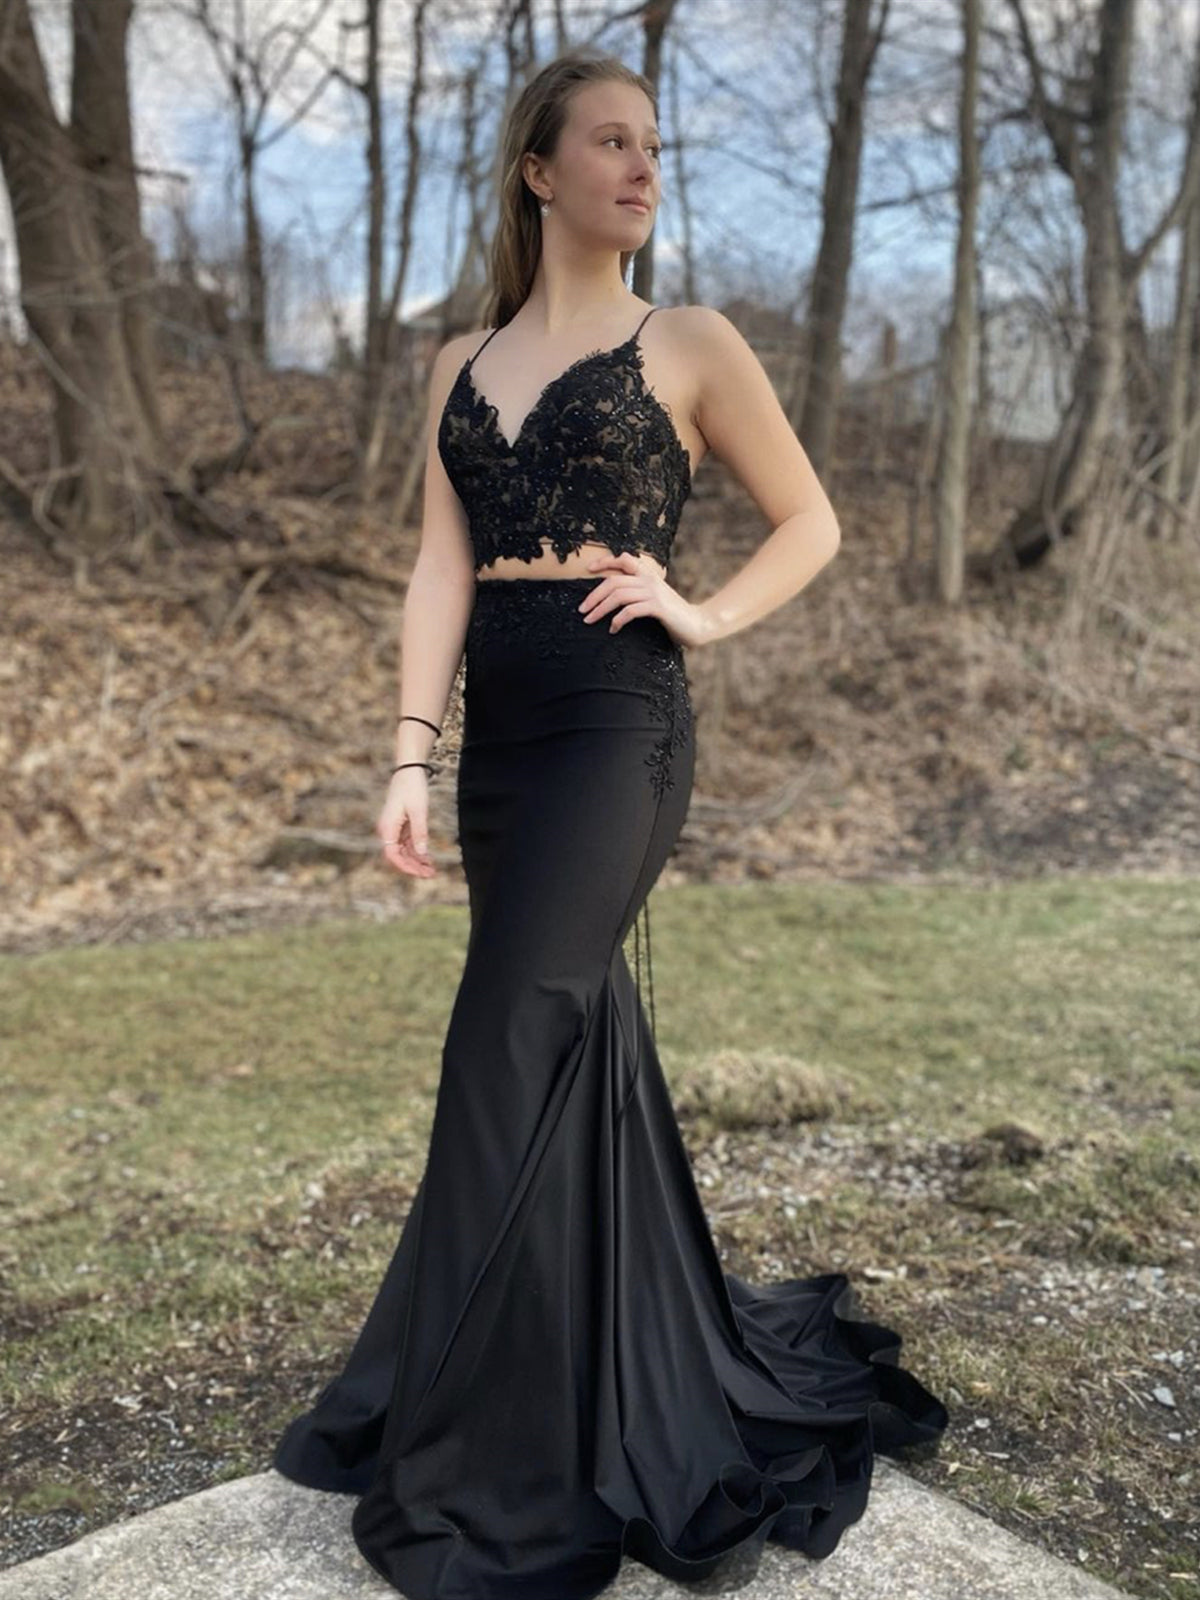 Mermaid V Neck Two Pieces Black Lace Long Prom Dresses, Mermaid Black Formal Dresses, 2 Pieces Black Evening Dresses